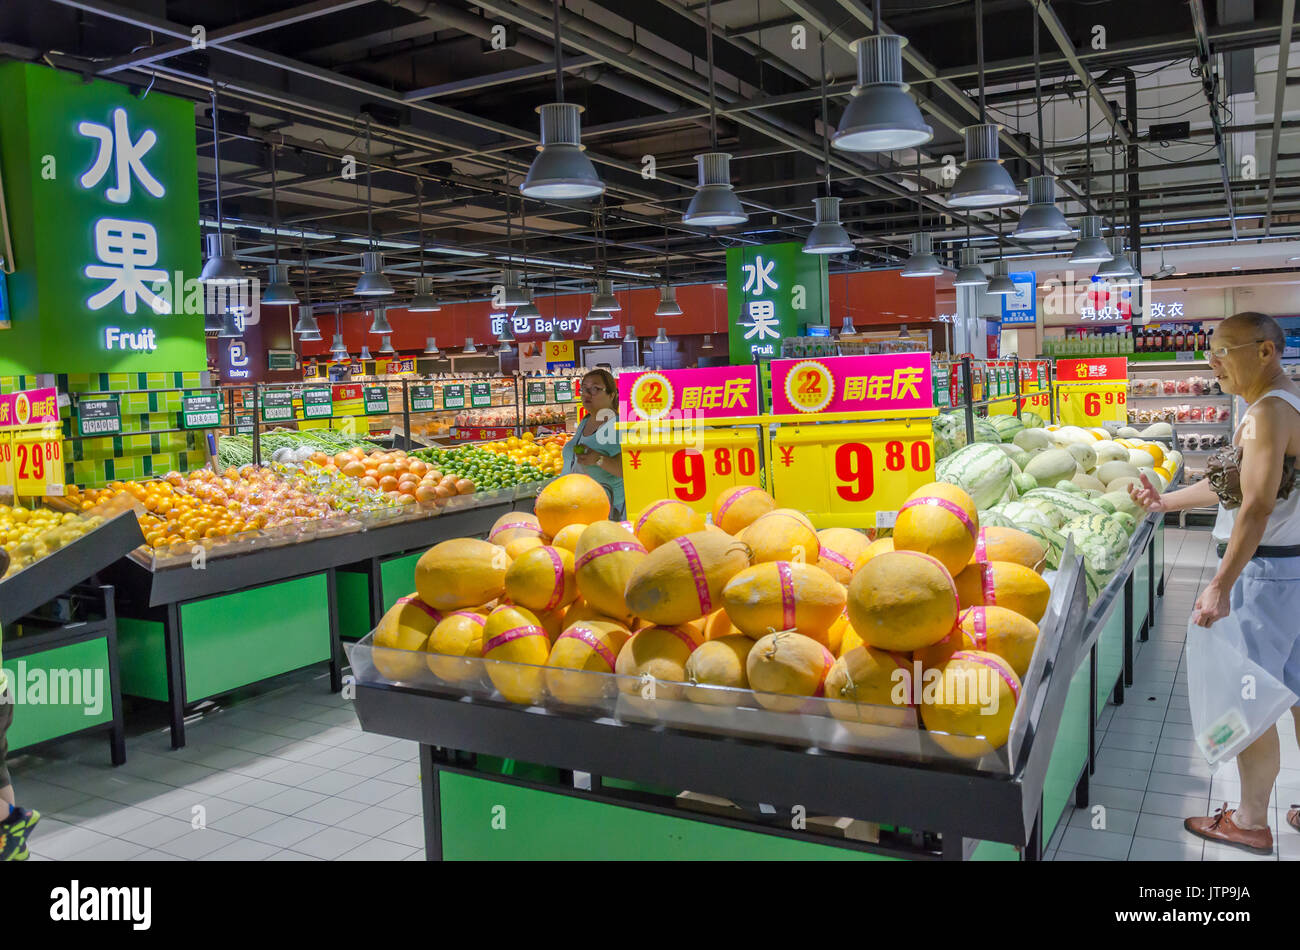 Fruit and veg for sale in a supermarket in Shanghai, China. Stock Photo